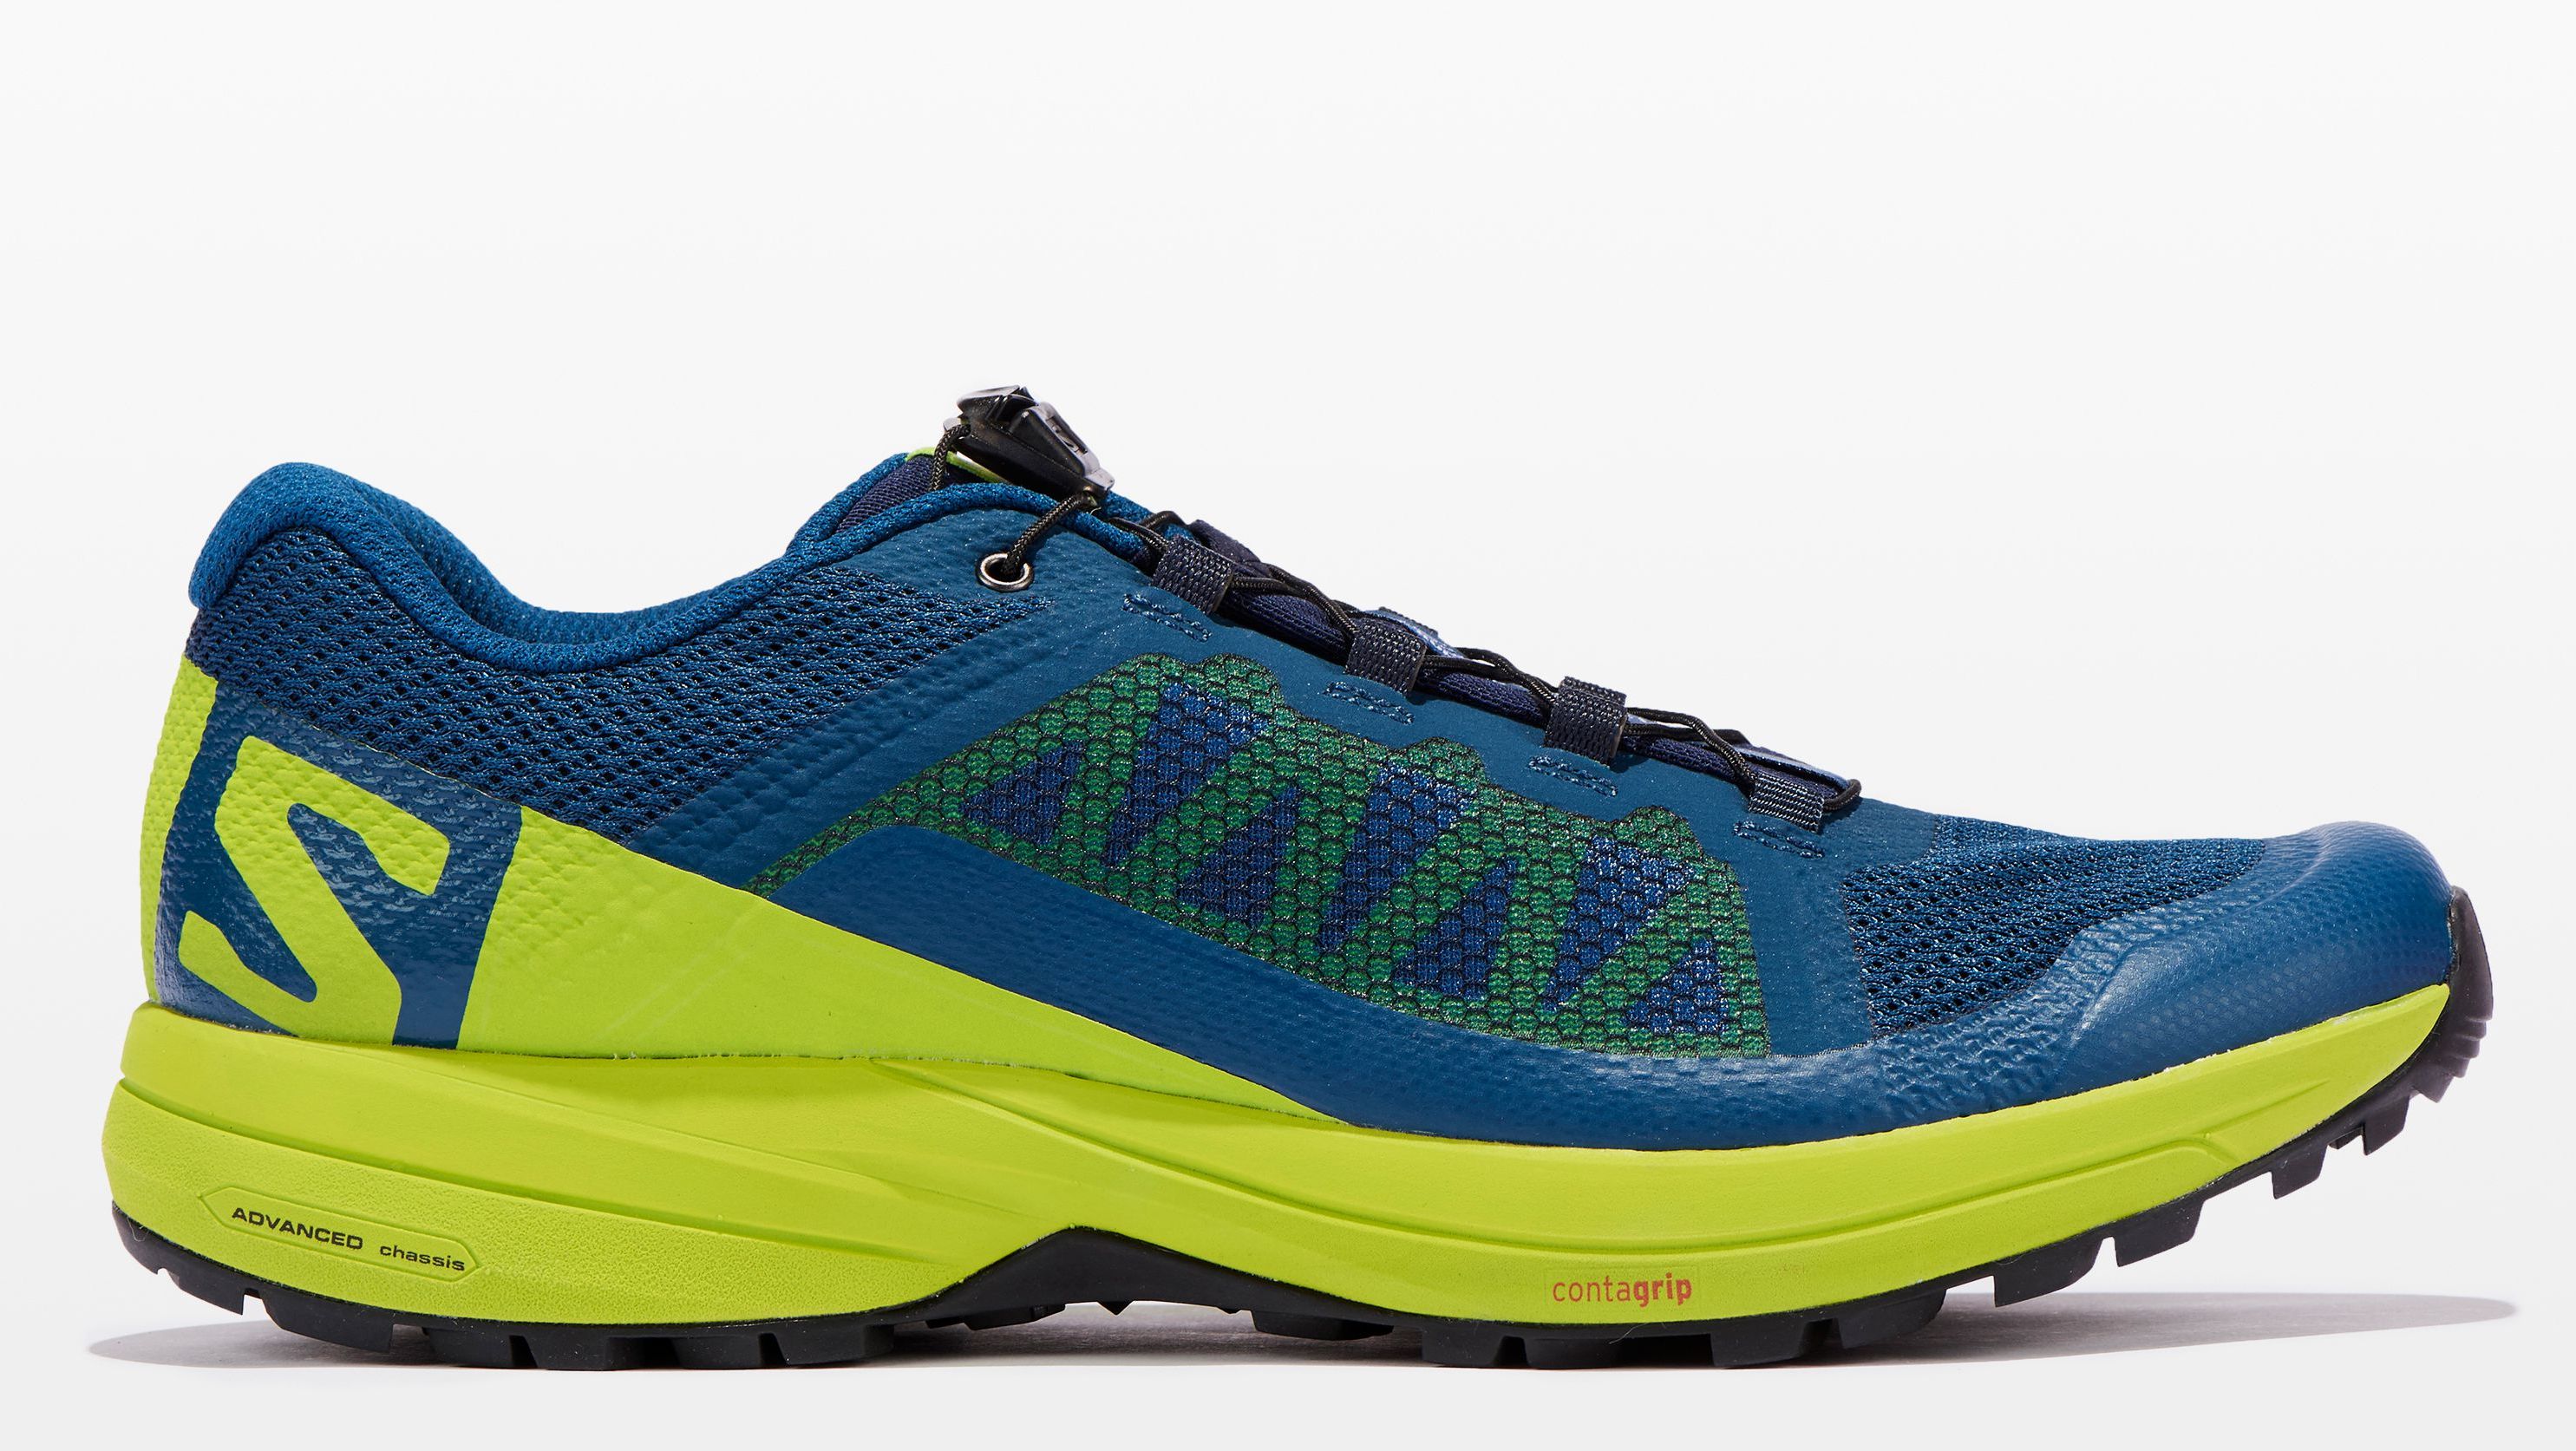 Salomon Running Shoes - 8 Best Shoes from Salomon 2019